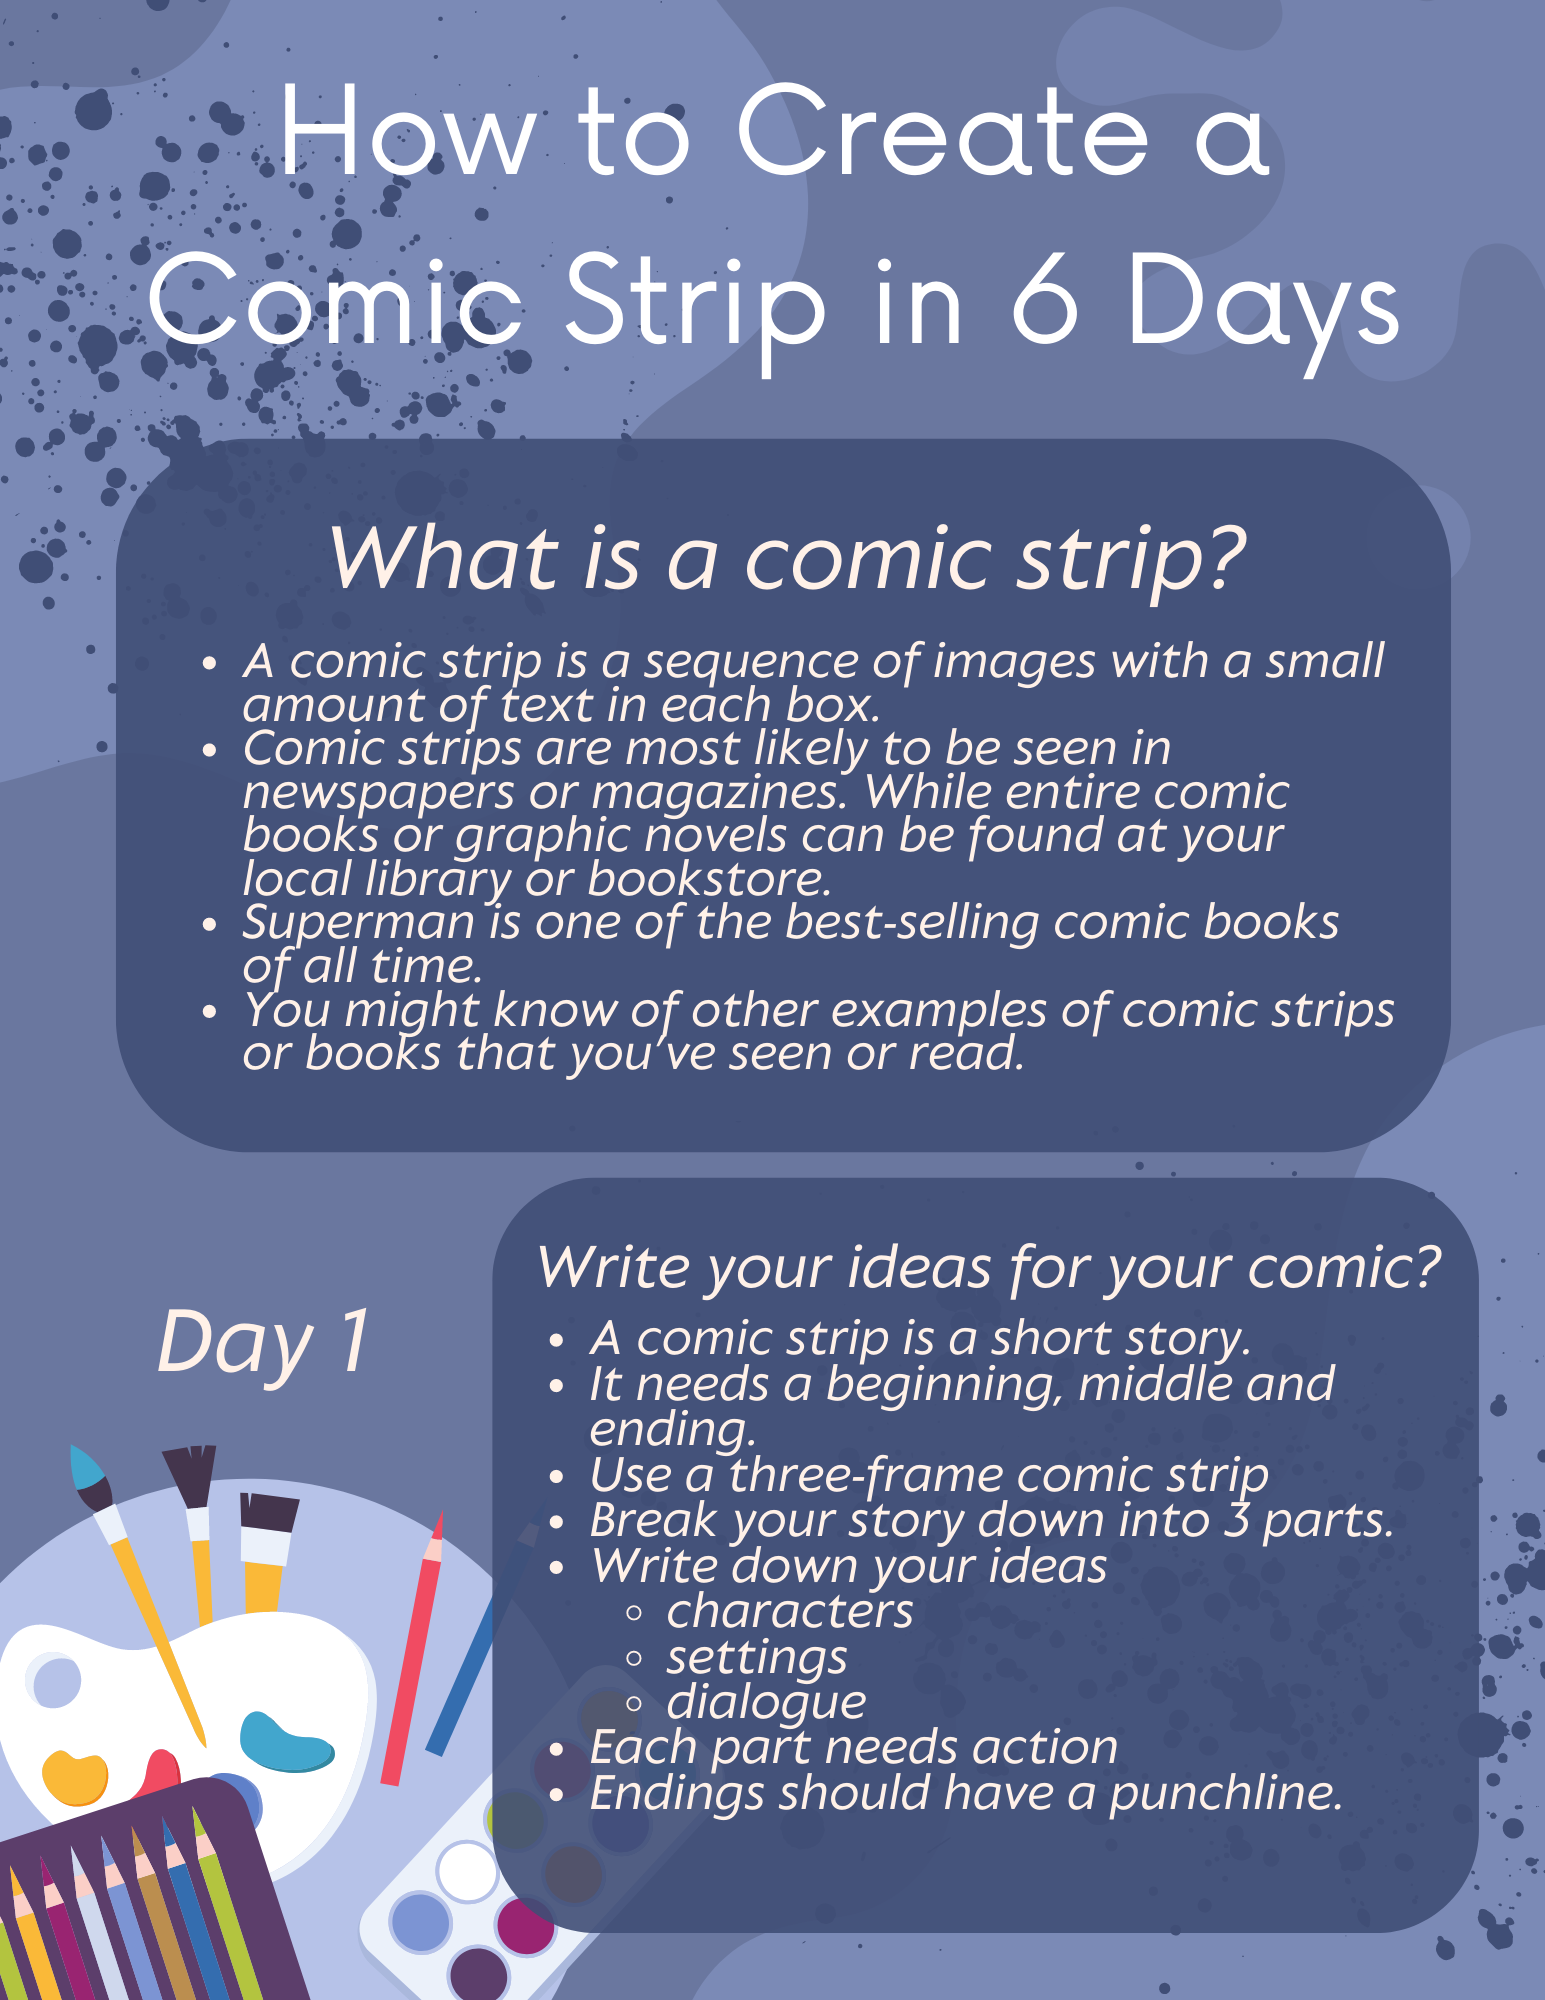 How to make a comic in 6 days – Day 1